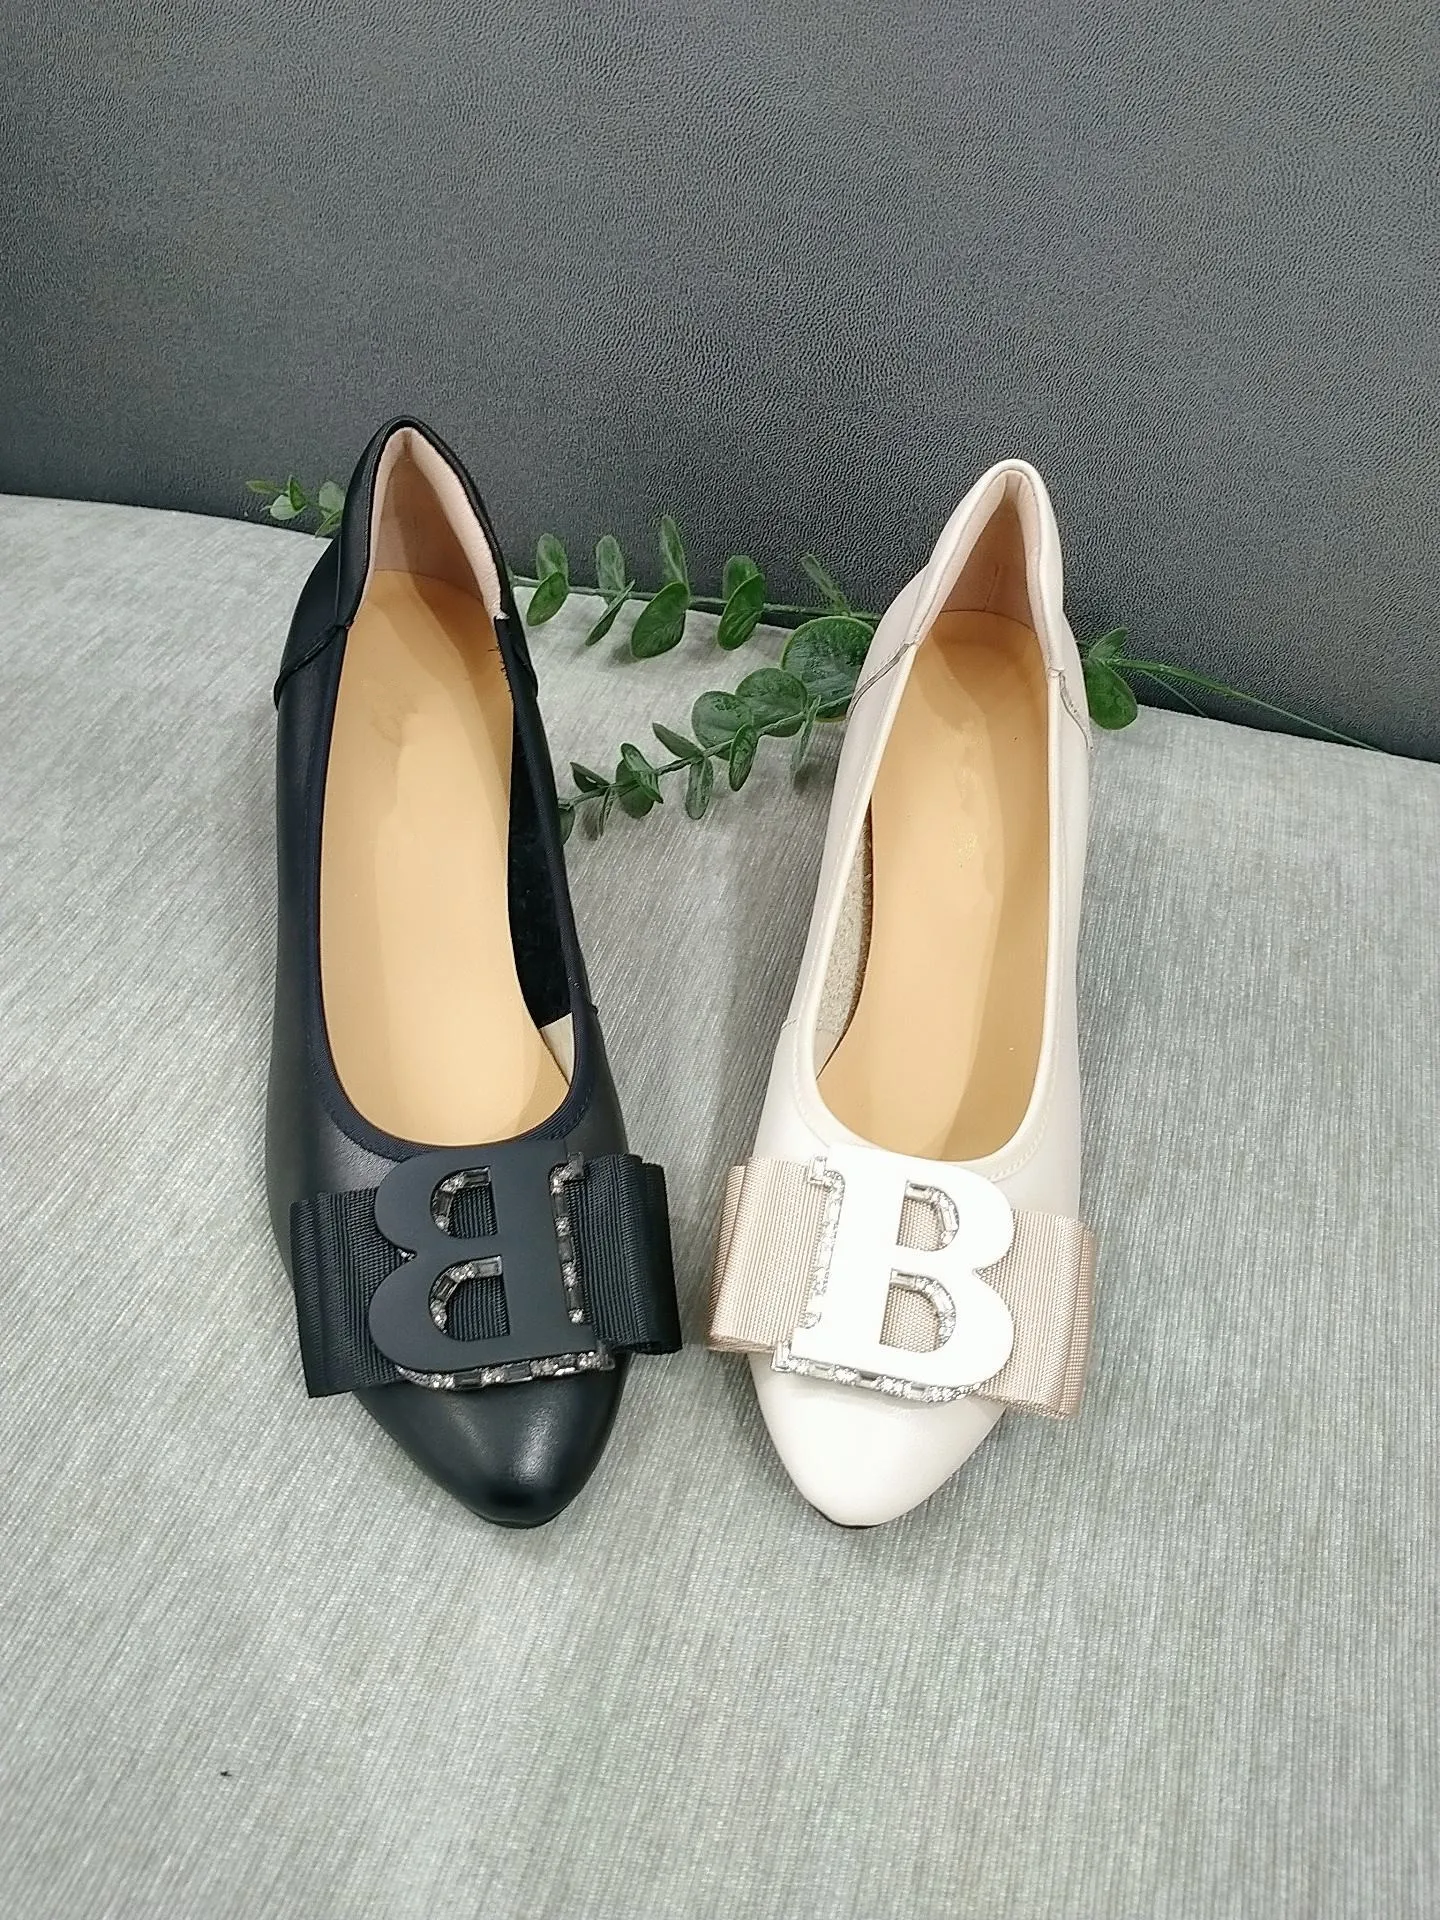 

New style single shoes in spring, fashionable butterfly buckle, comfortable, versatile leather upper, all season women's shoes